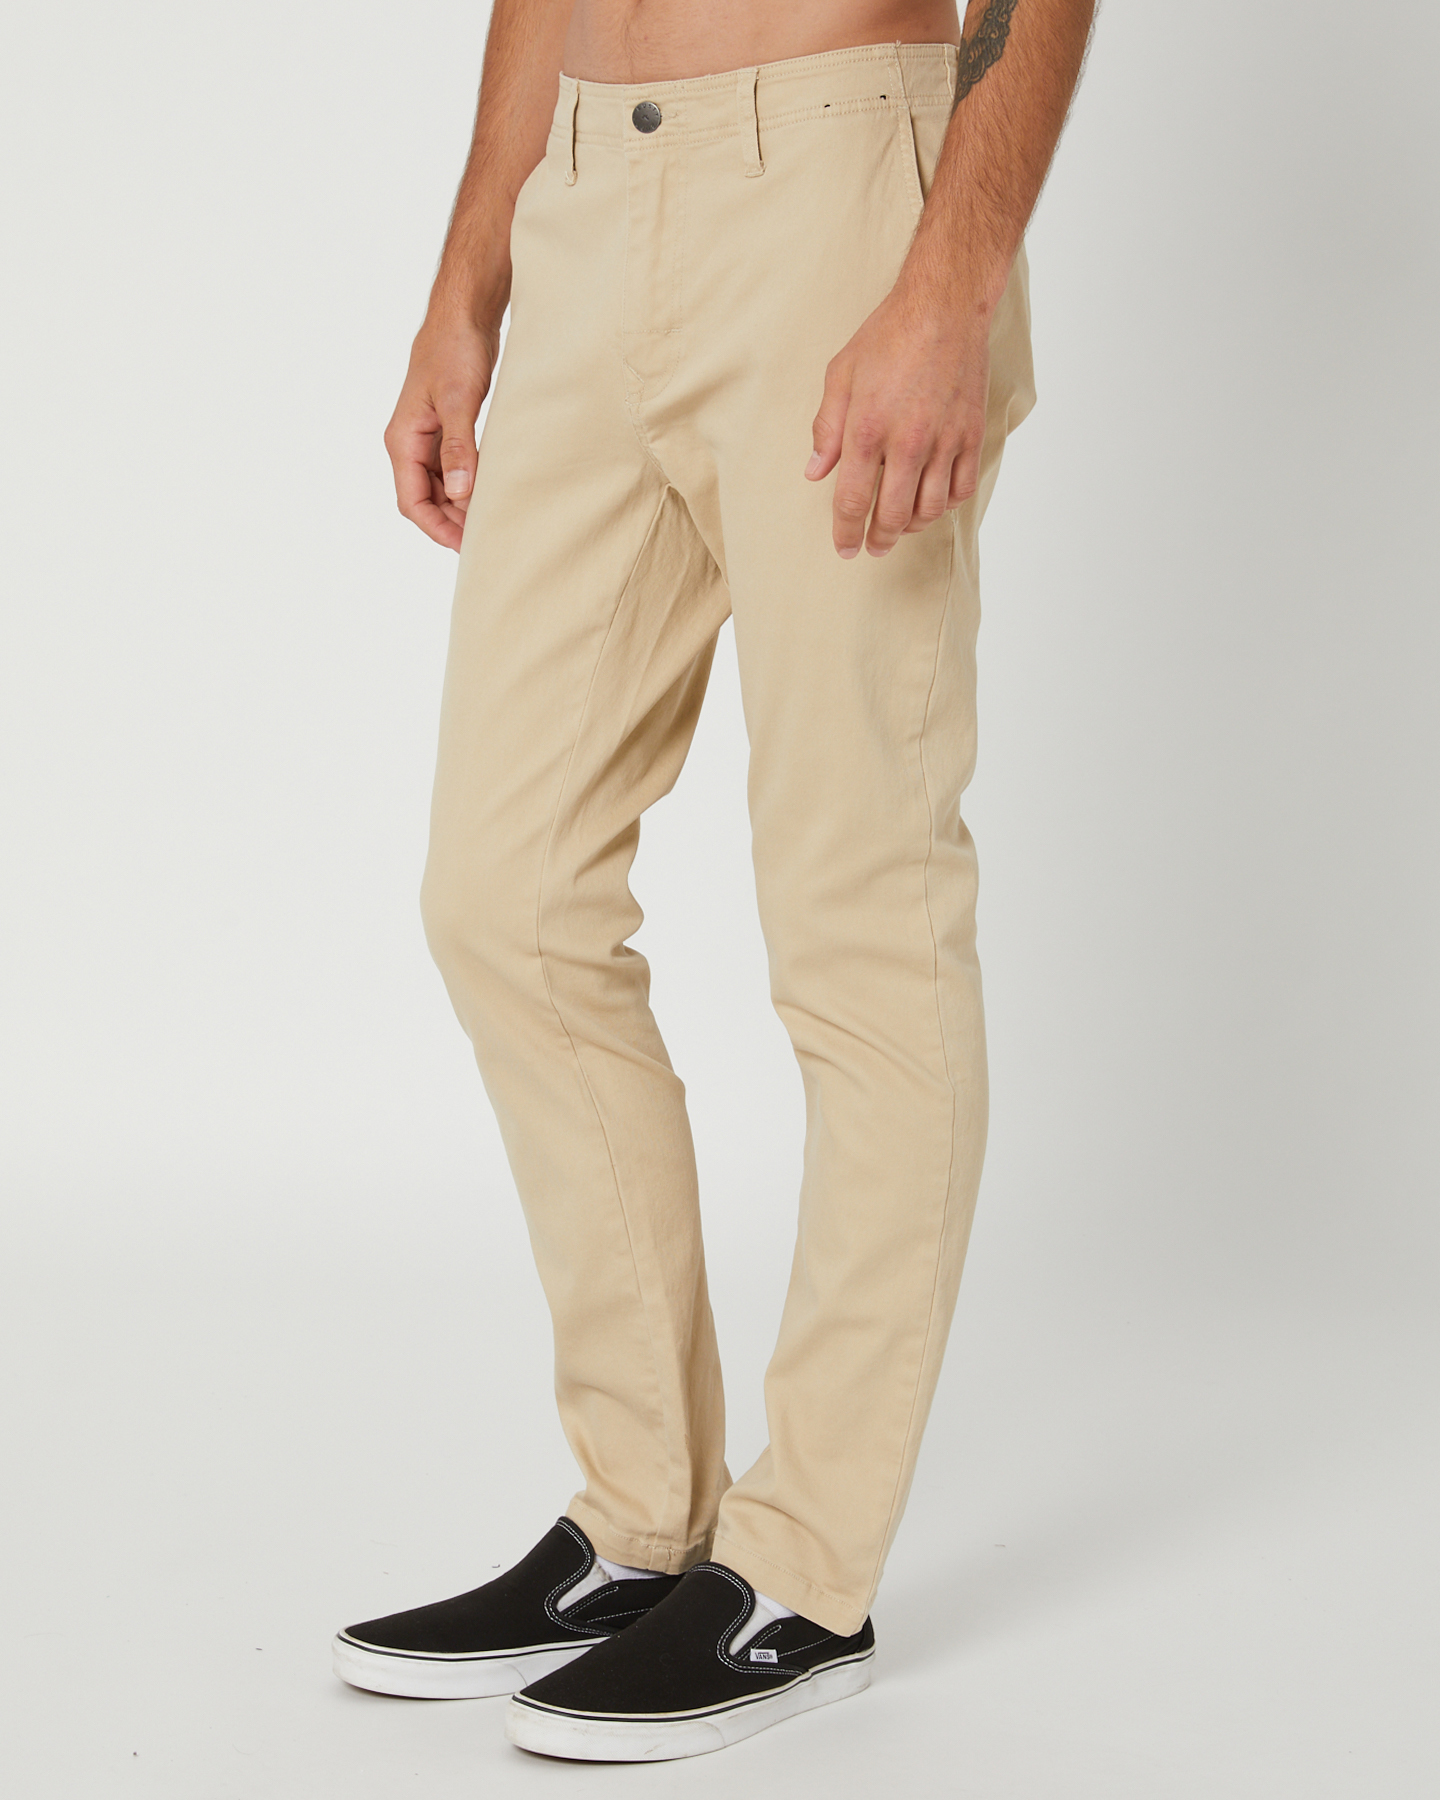 Rusty John The 2Nd Mens Chino Pant - Light Fennel | SurfStitch